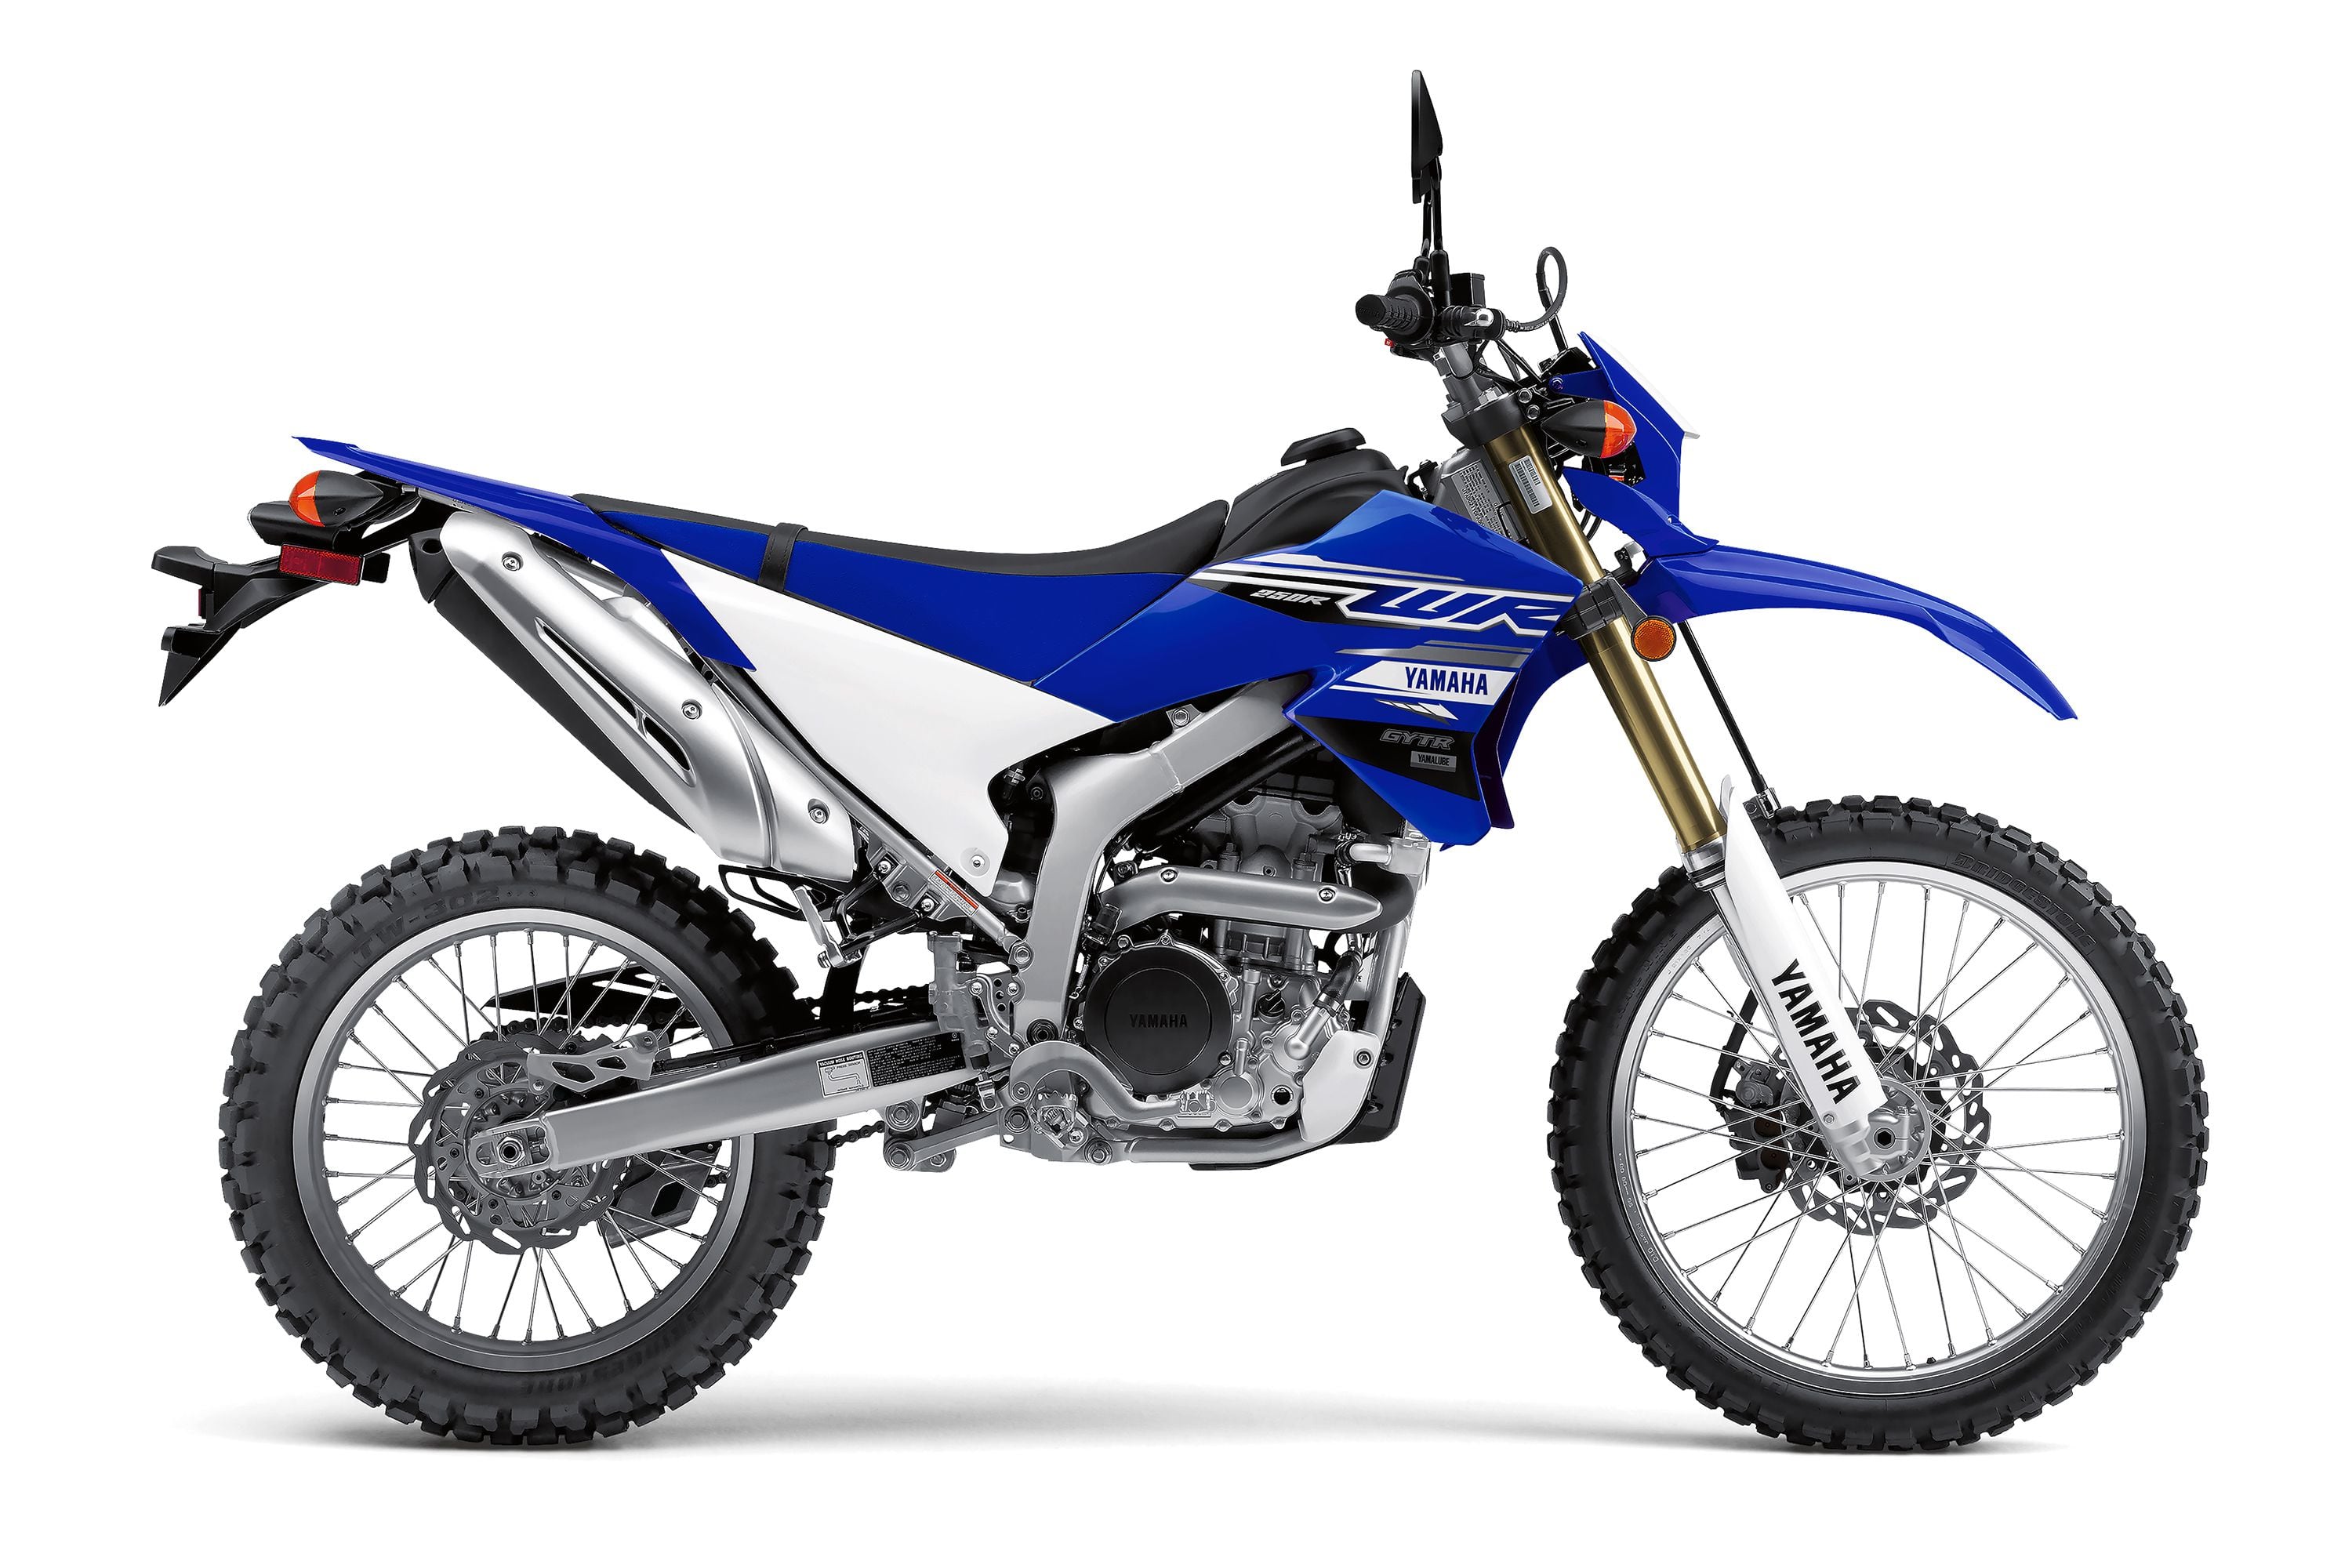 altura sorpresa Grillo 2020 Yamaha WR250R Buyer's Guide: Specs, Photos, Price | Cycle World